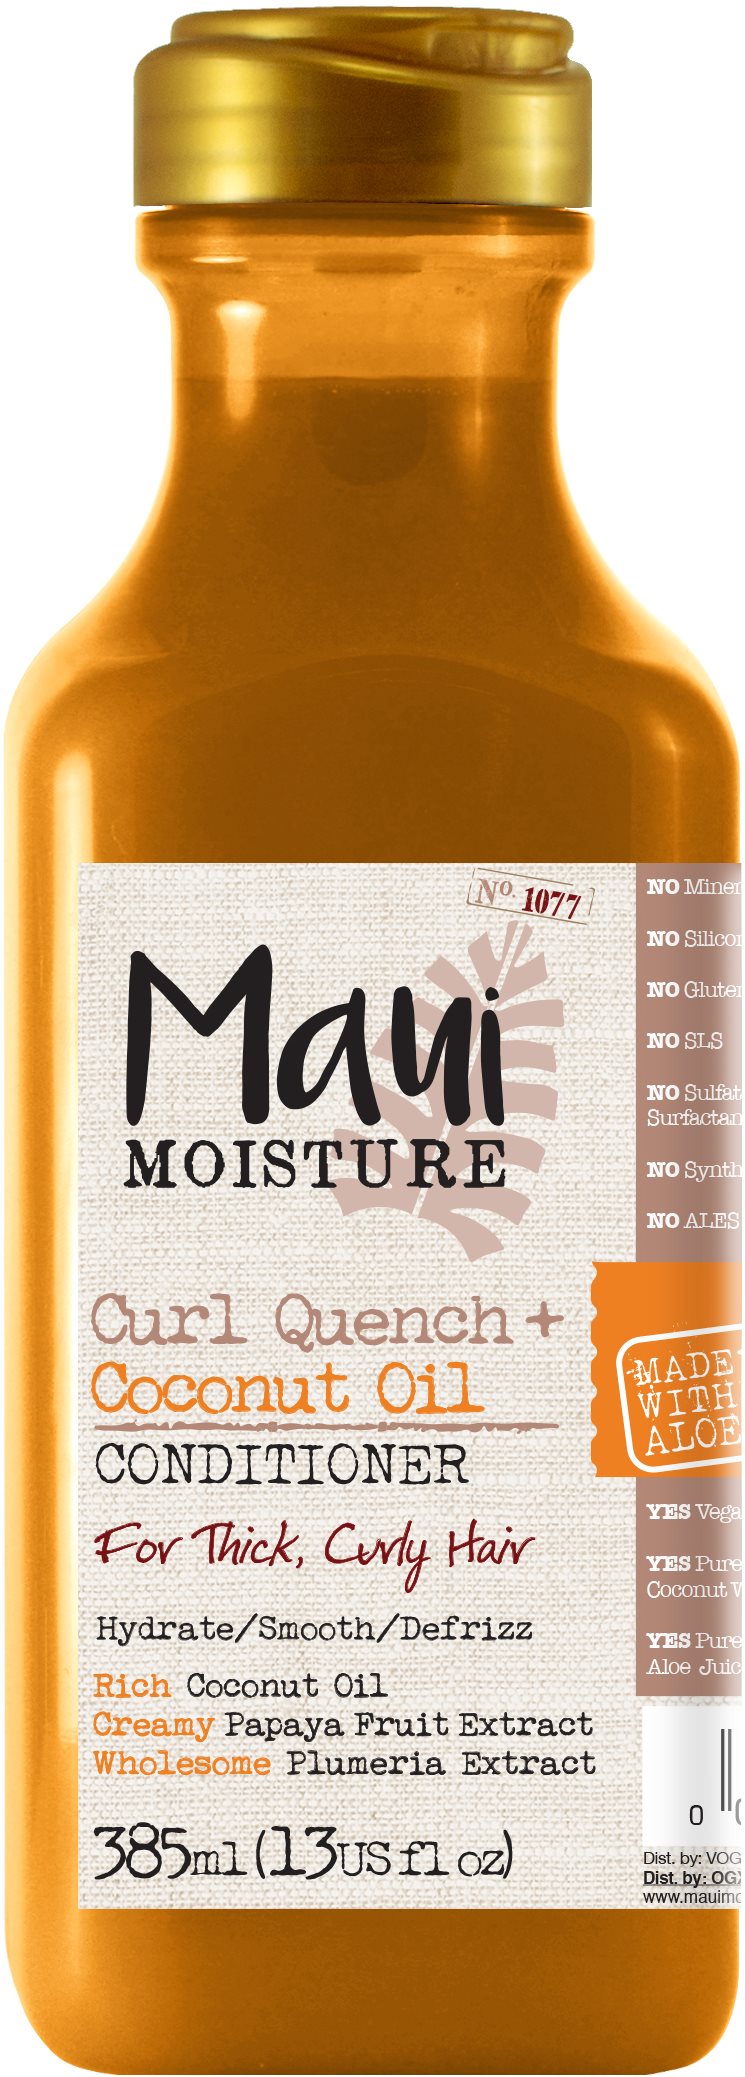 MAUI MOISTURE Coconut Oil Thick and Curly Hair Conditioner 385 ml